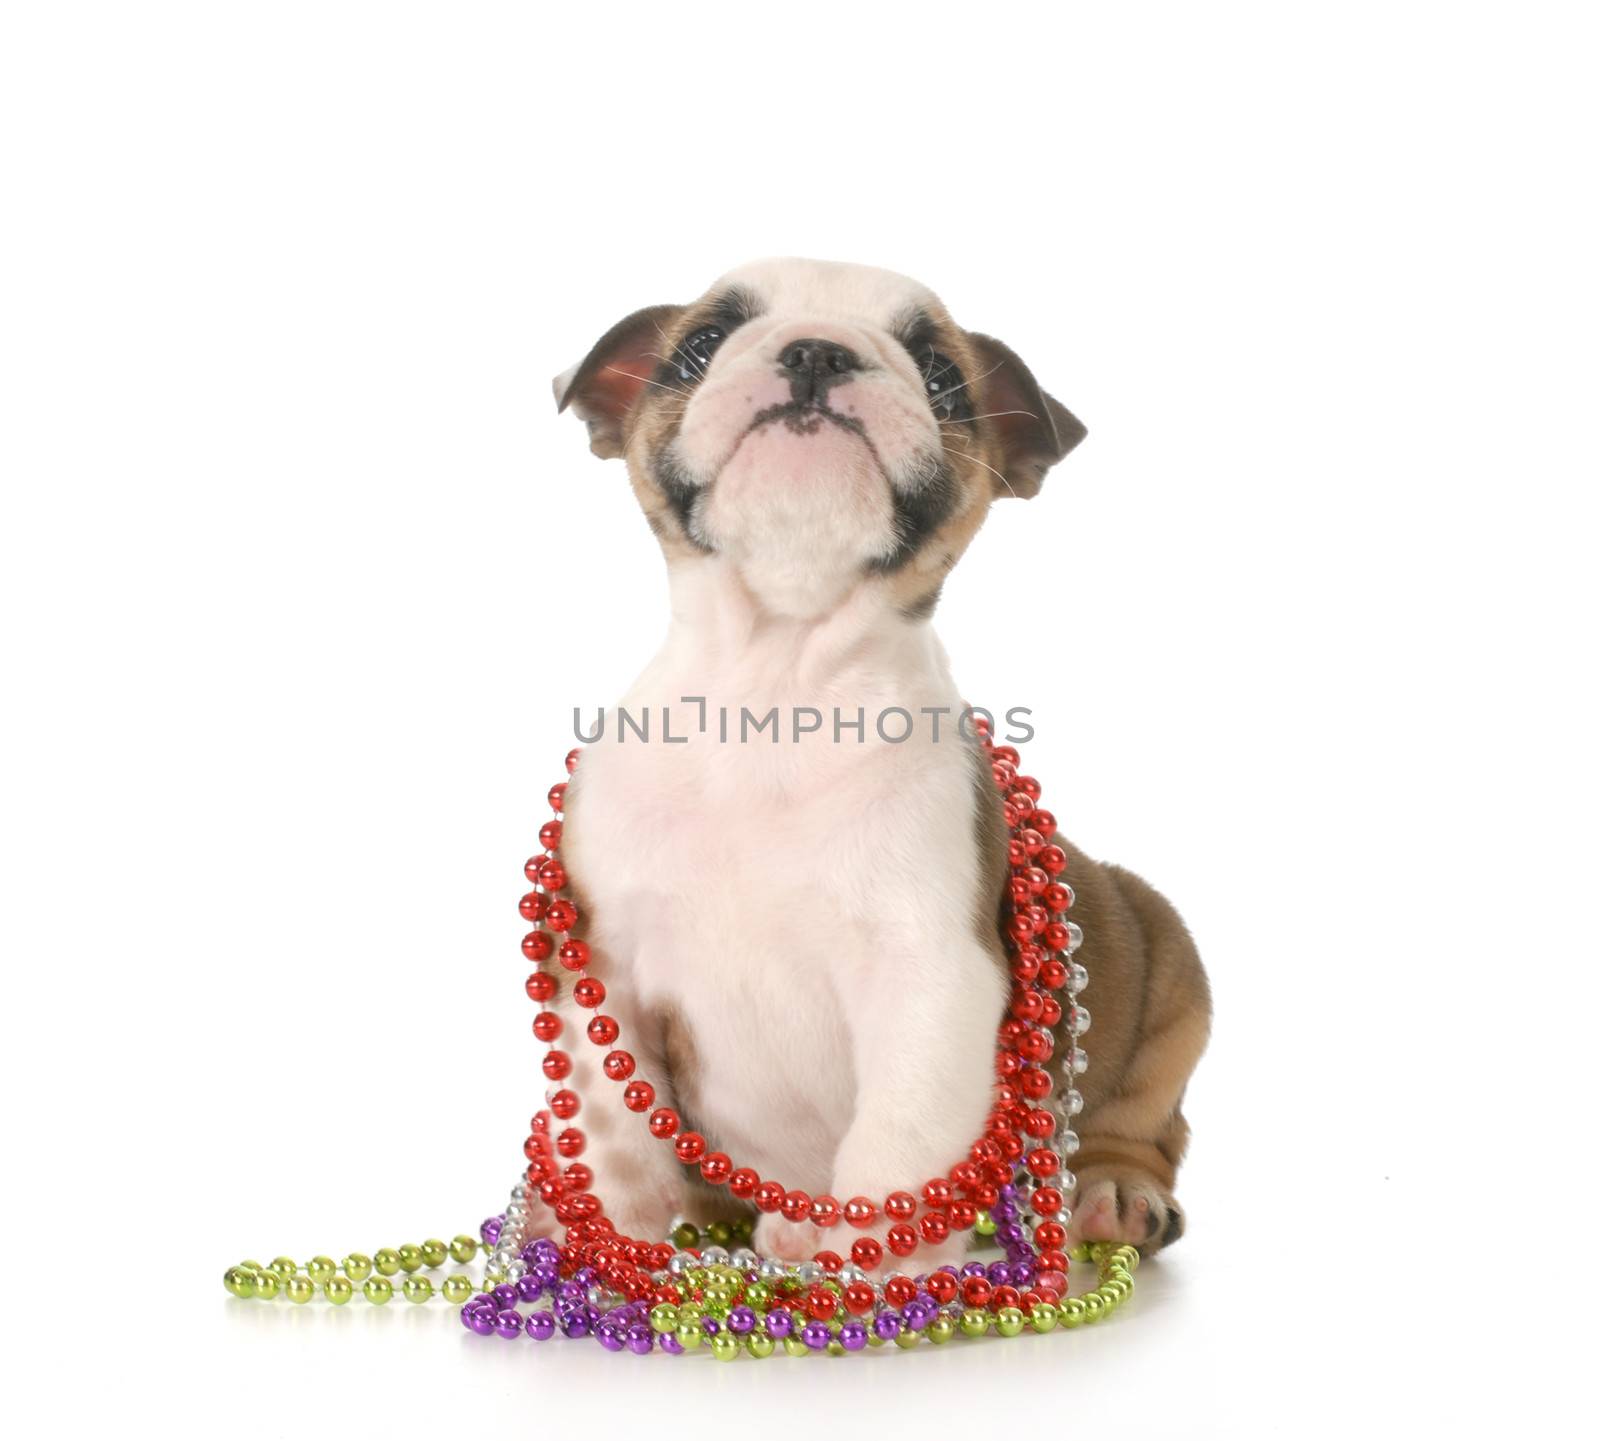 female bulldog puppy with colorful beads around neck isolated on white background - 7 weeks old